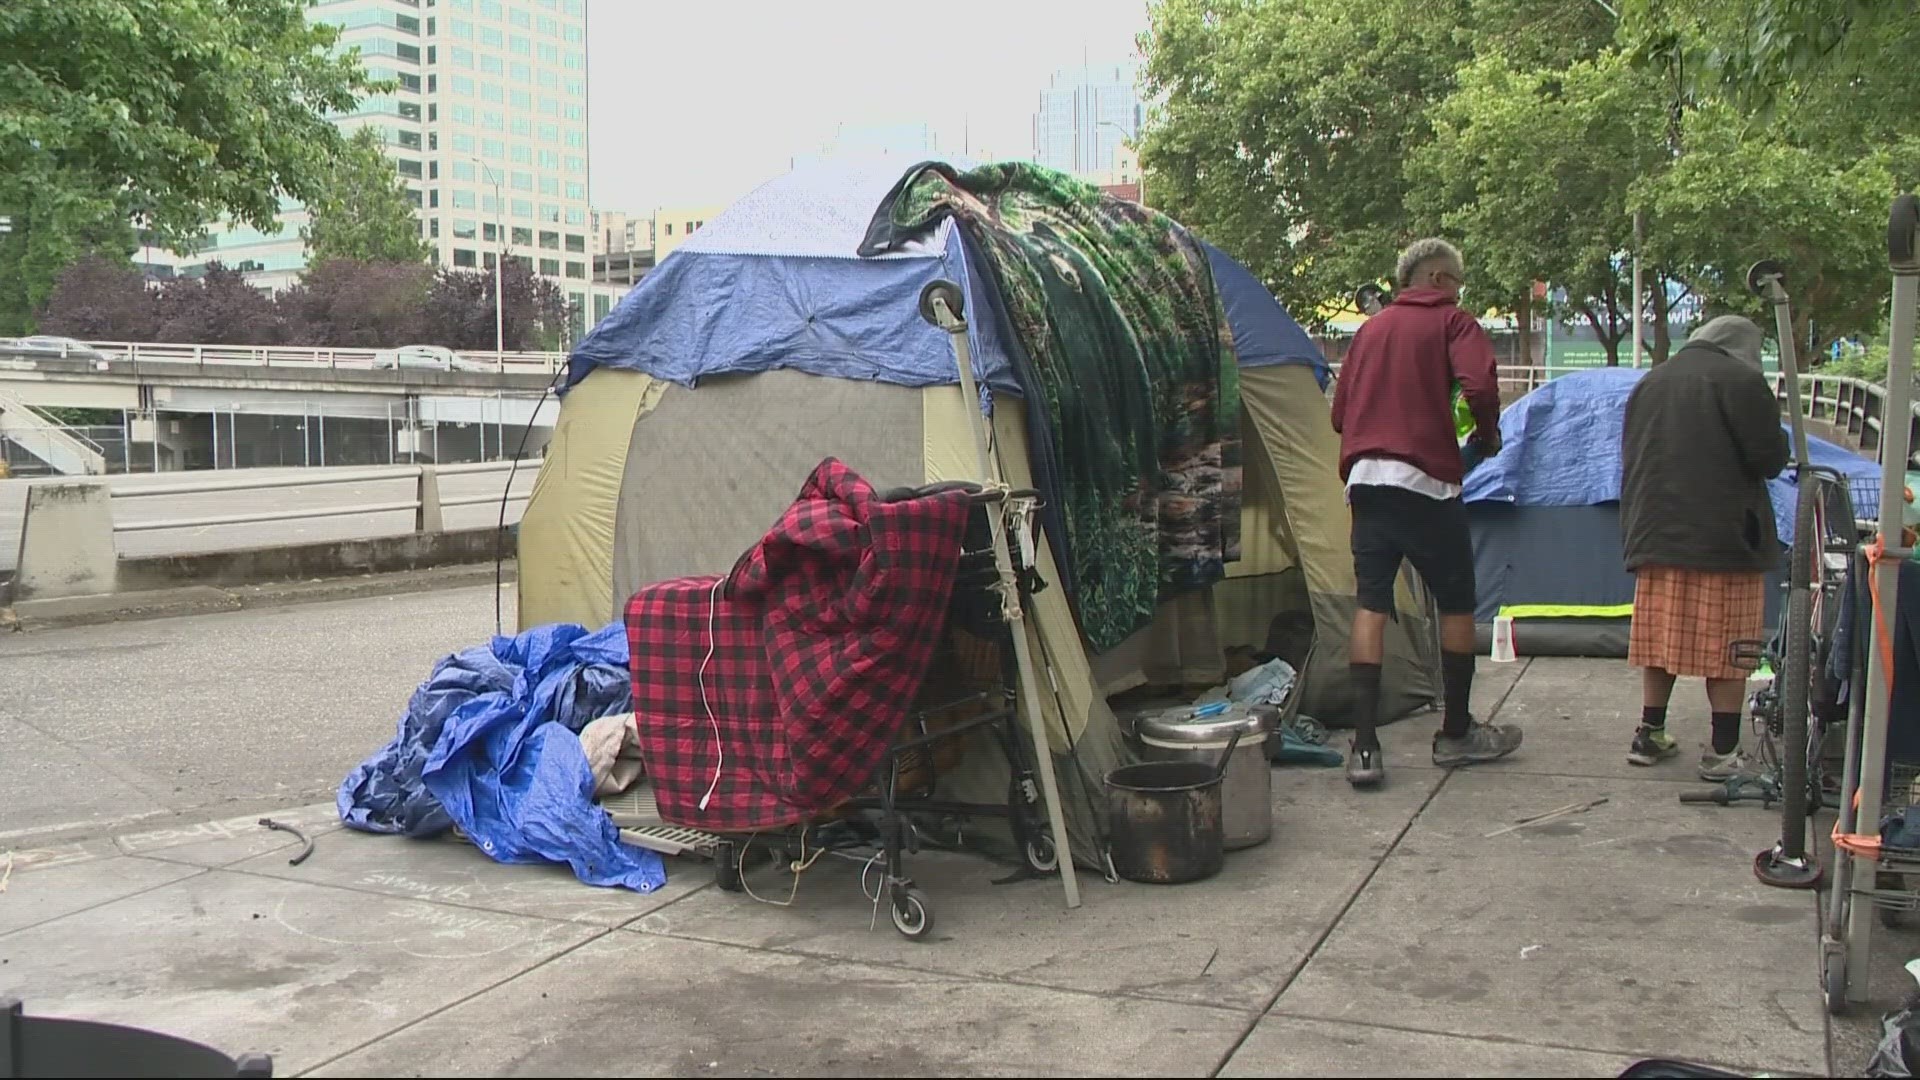 In two weeks, Portland will begin enforcing a daytime ban on homeless campsites.